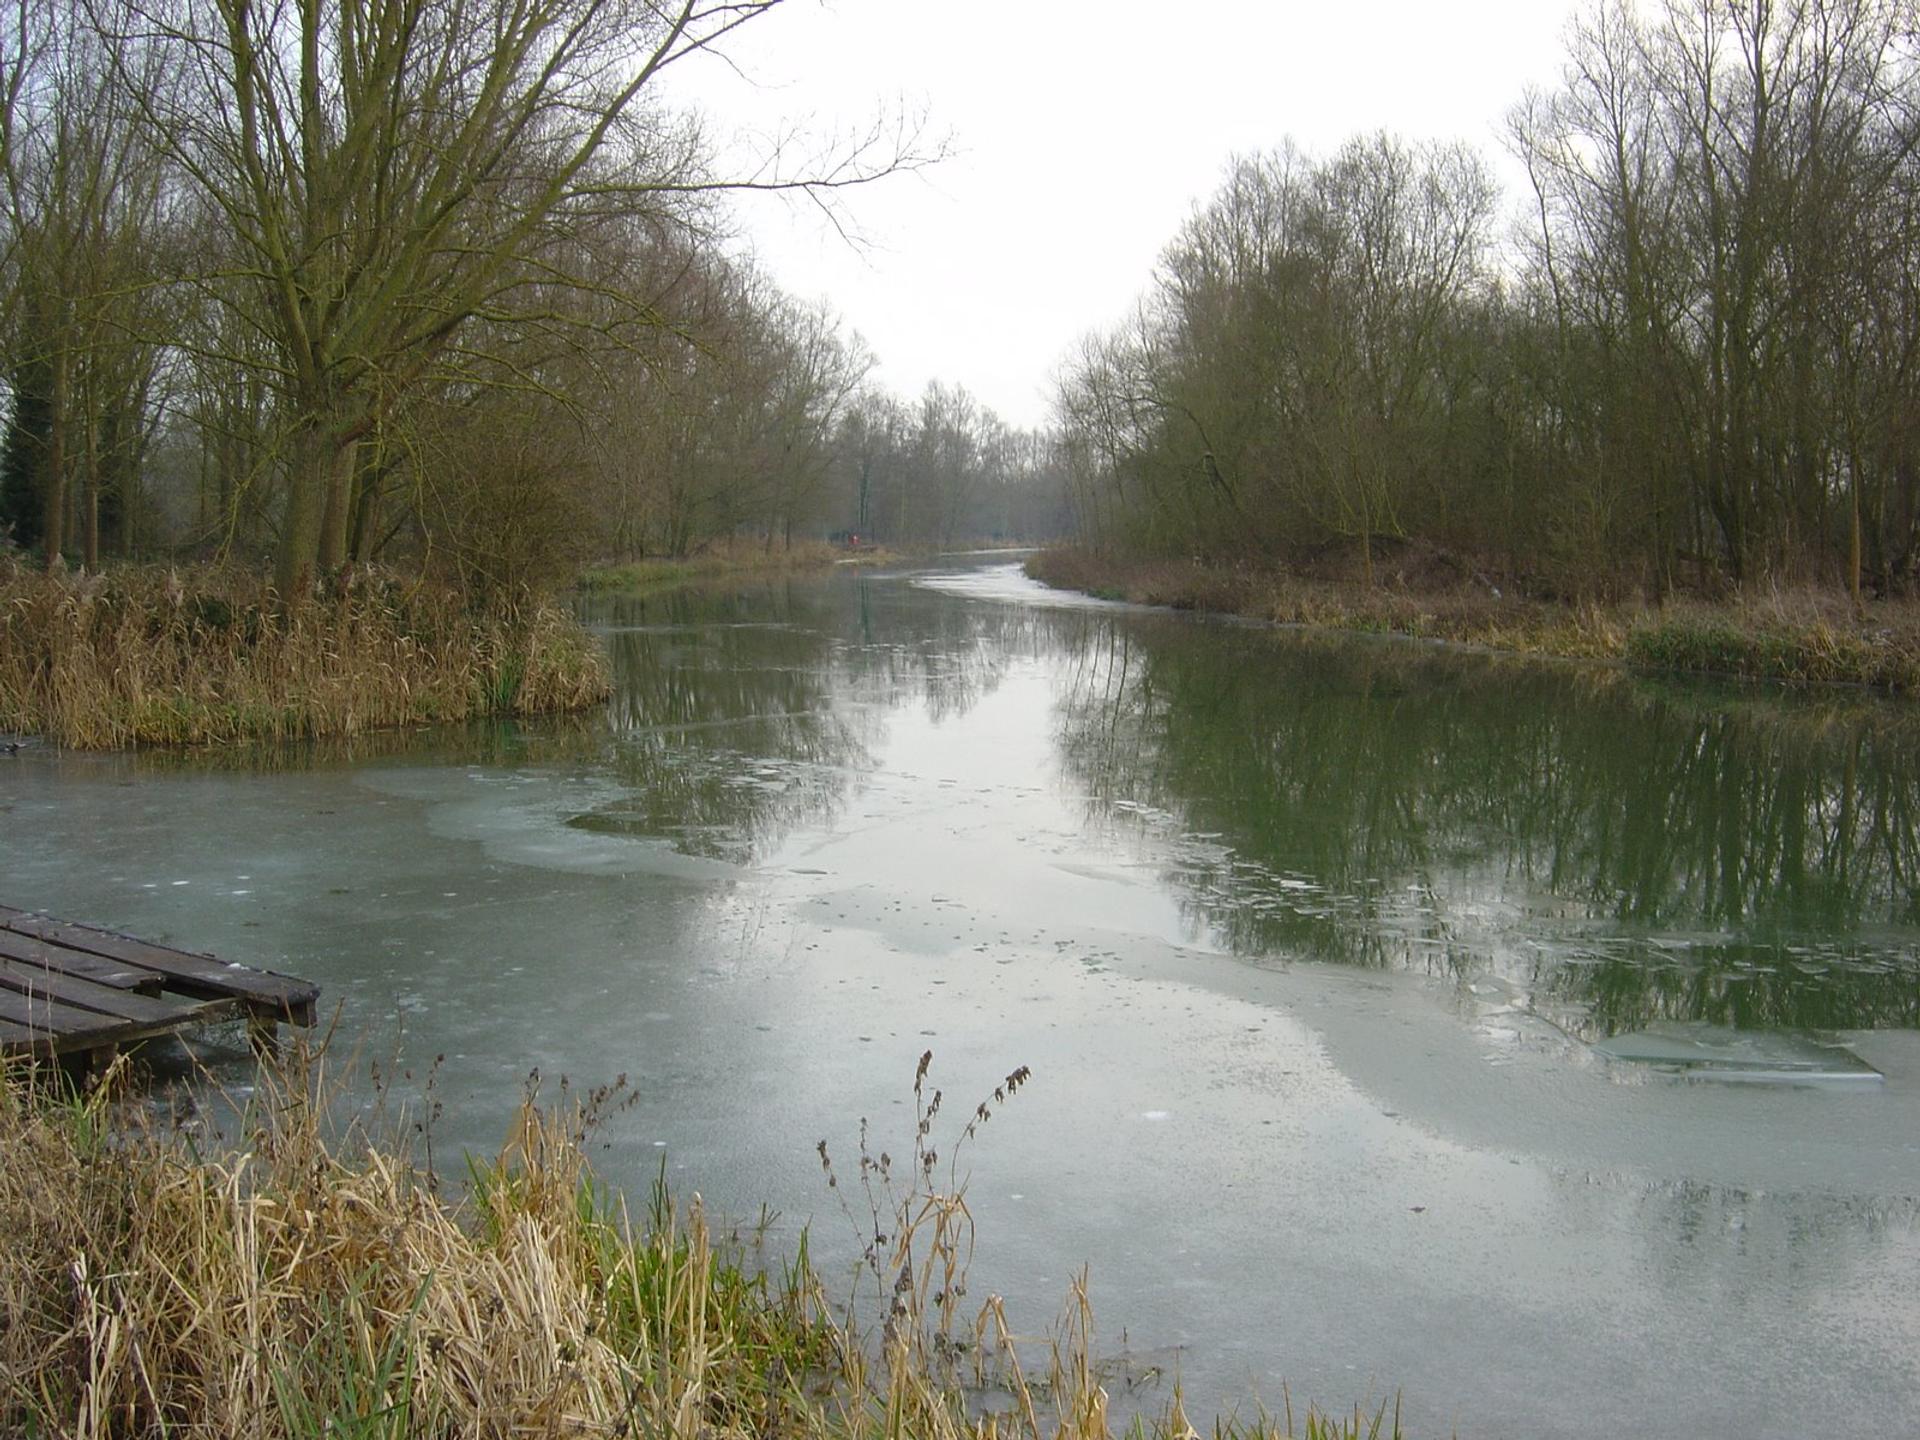 The river is largely frozen.